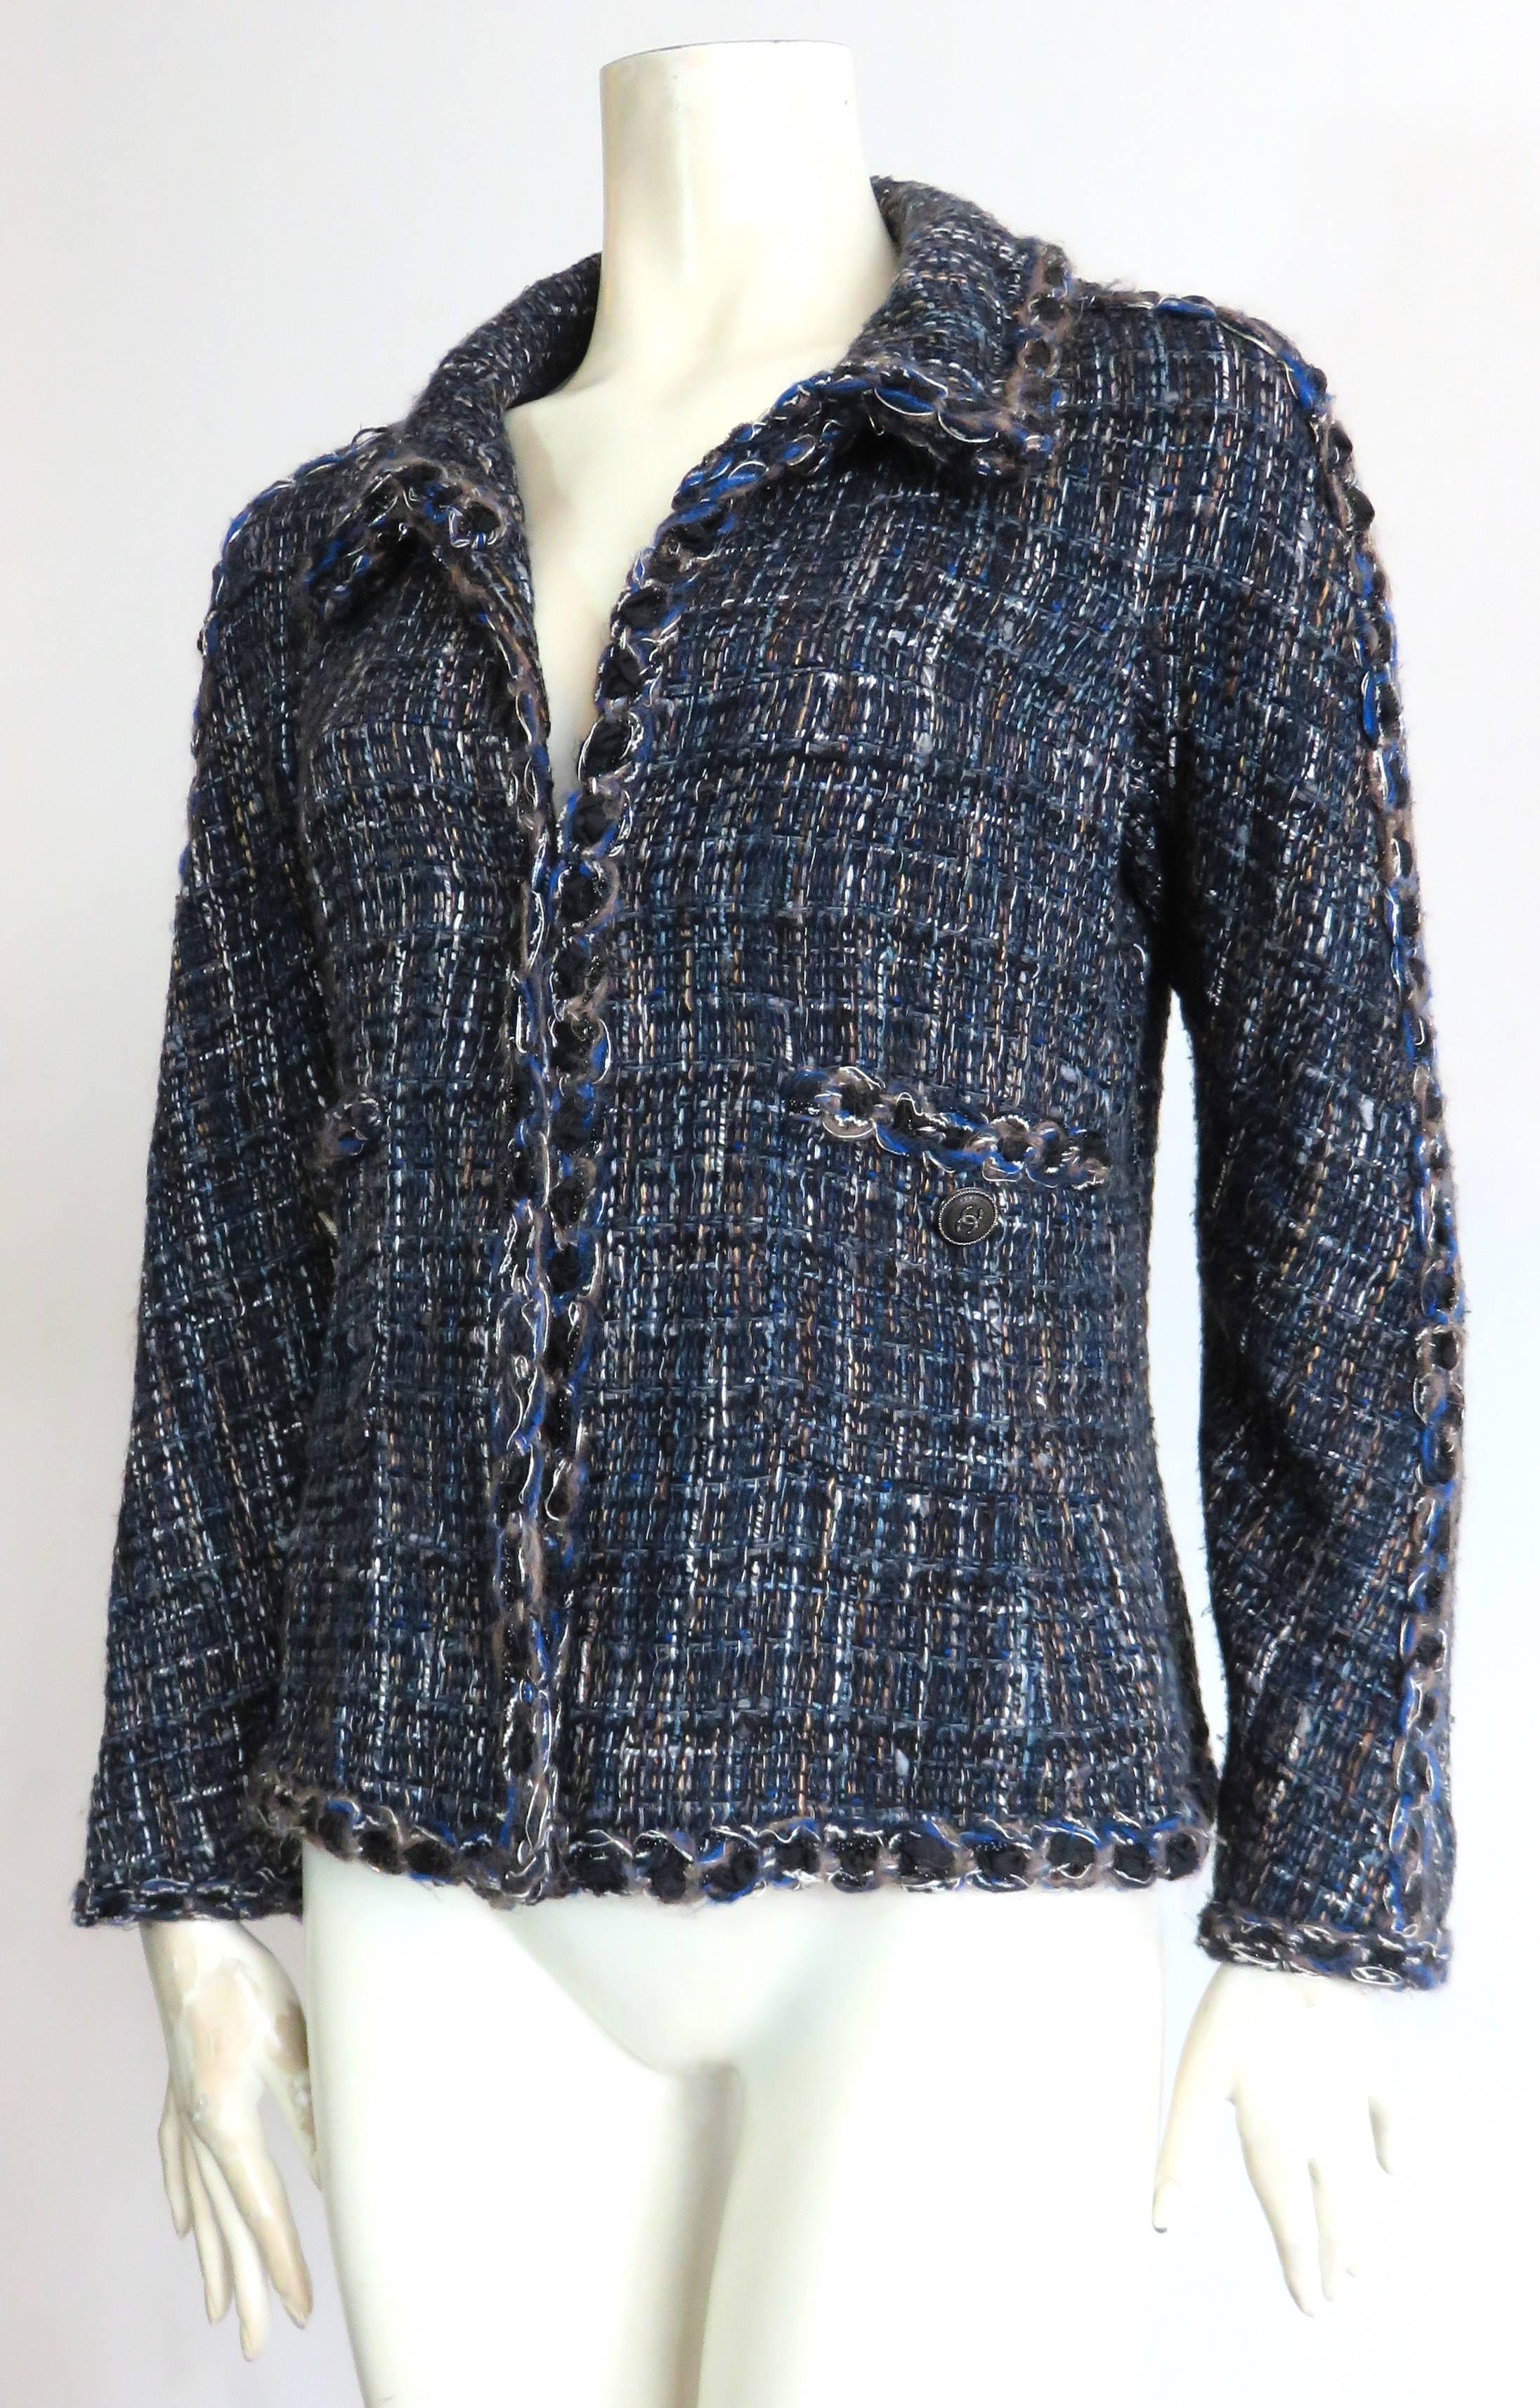 CHANEL PARIS Novelty tweed, open-front jacket featuring multi-yarn detail braiding at edges.

Multi-color, woven tweed ground in black, teal, gray, white, and purple-tone blue.

The outer edges of the jacket feature novelty braid detail composed